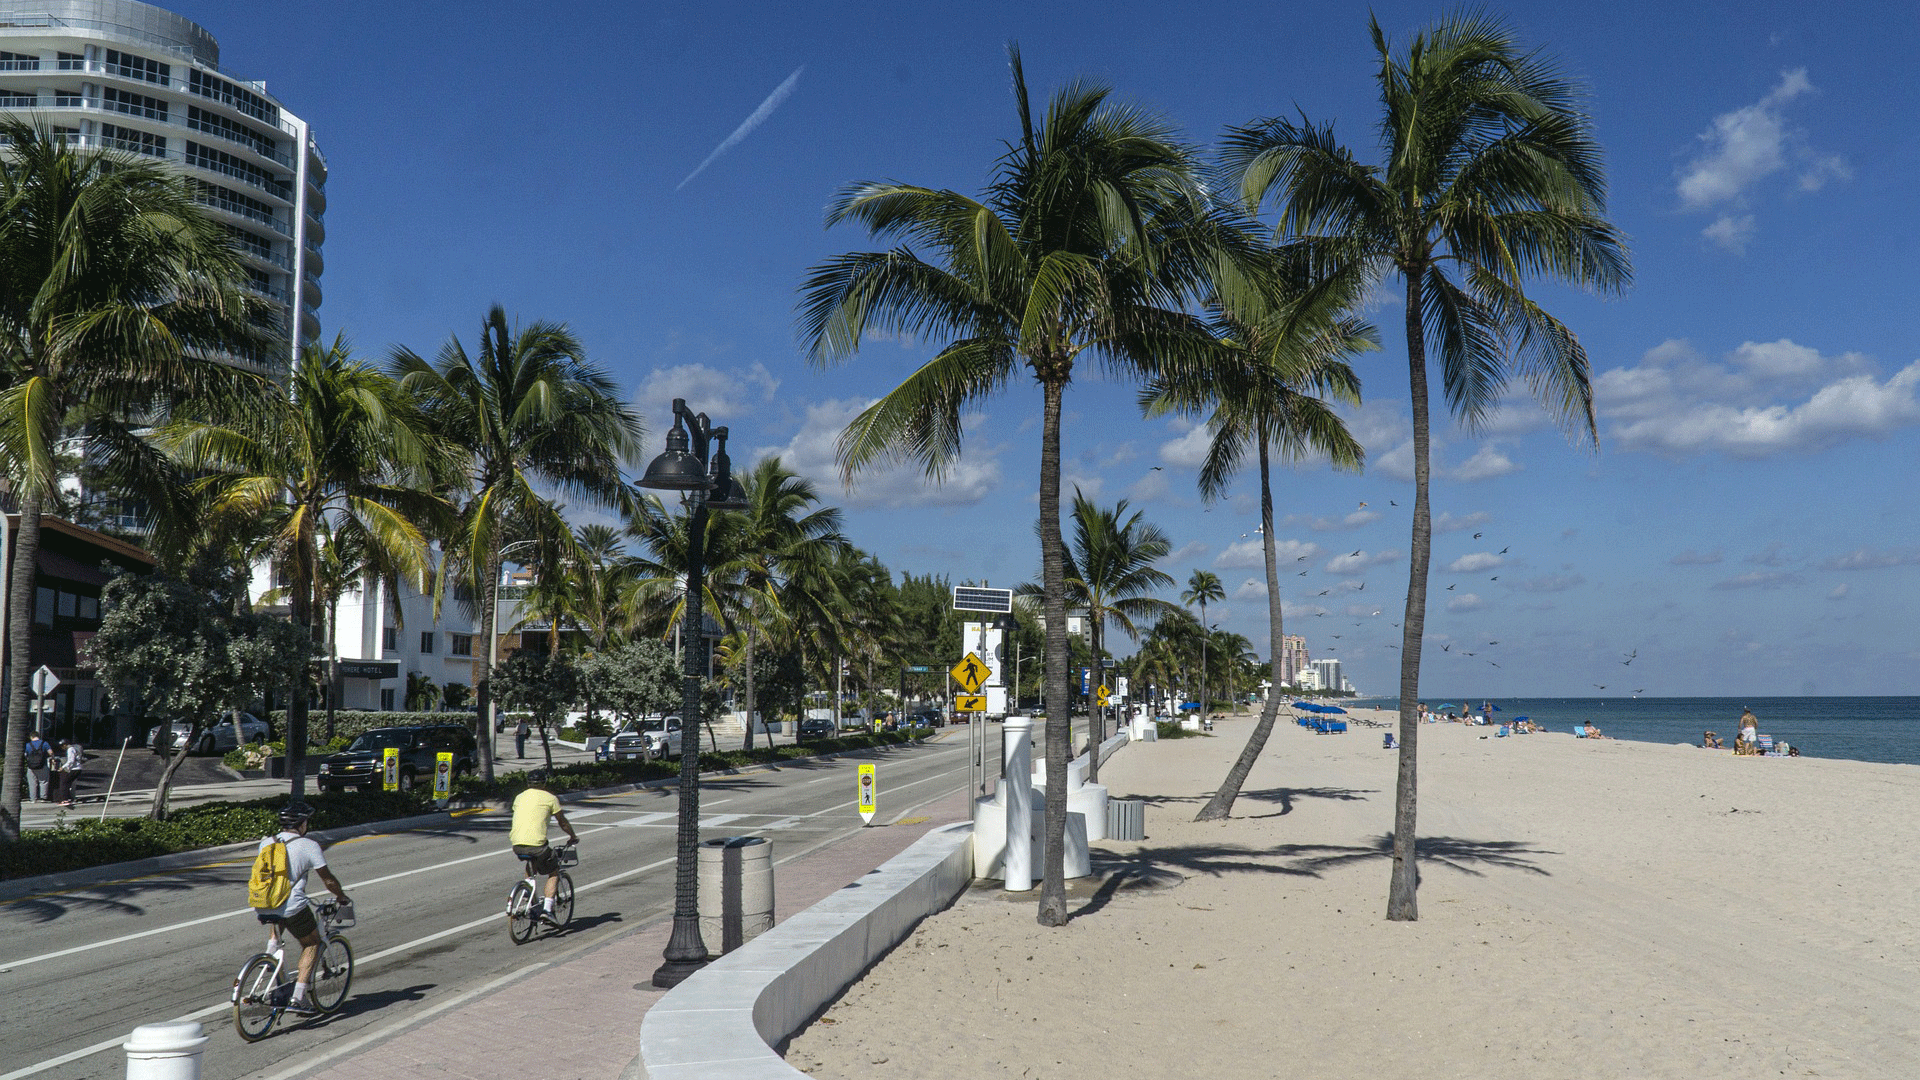 People riding bikes in Fort Lauderdale